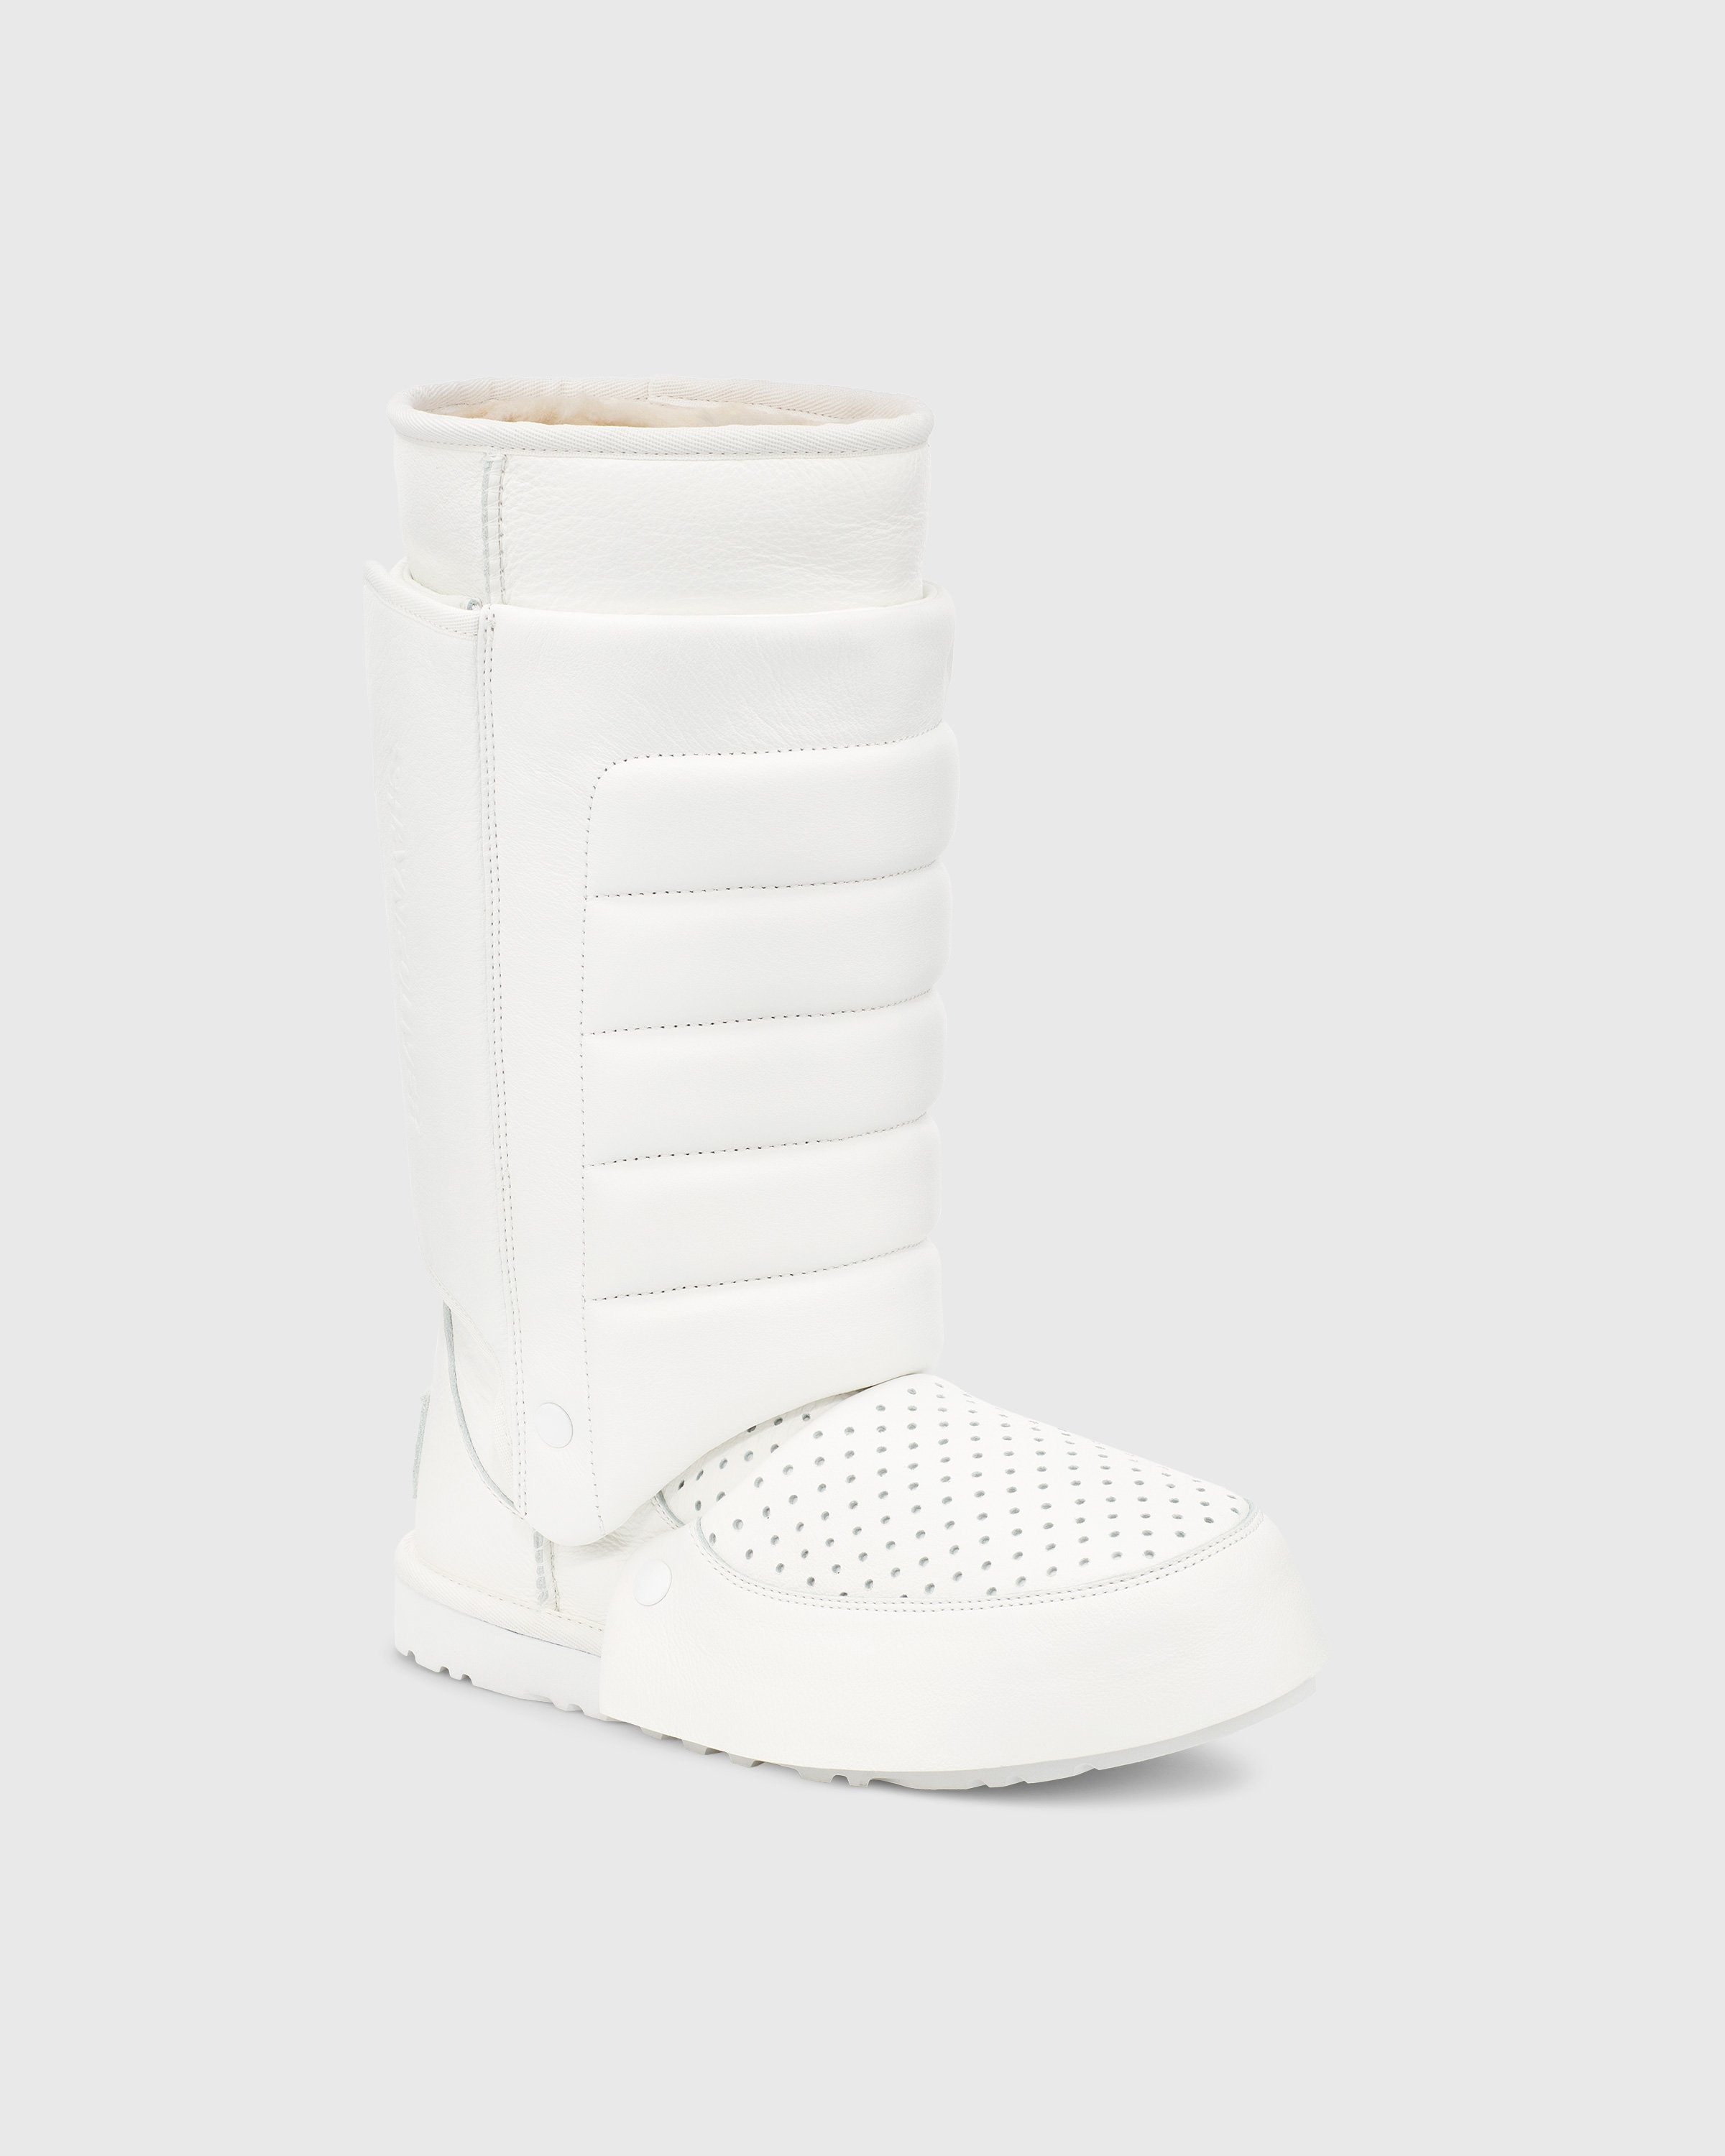 Ugg x Shayne Oliver - Tall Boot White - Footwear - White - Image 4